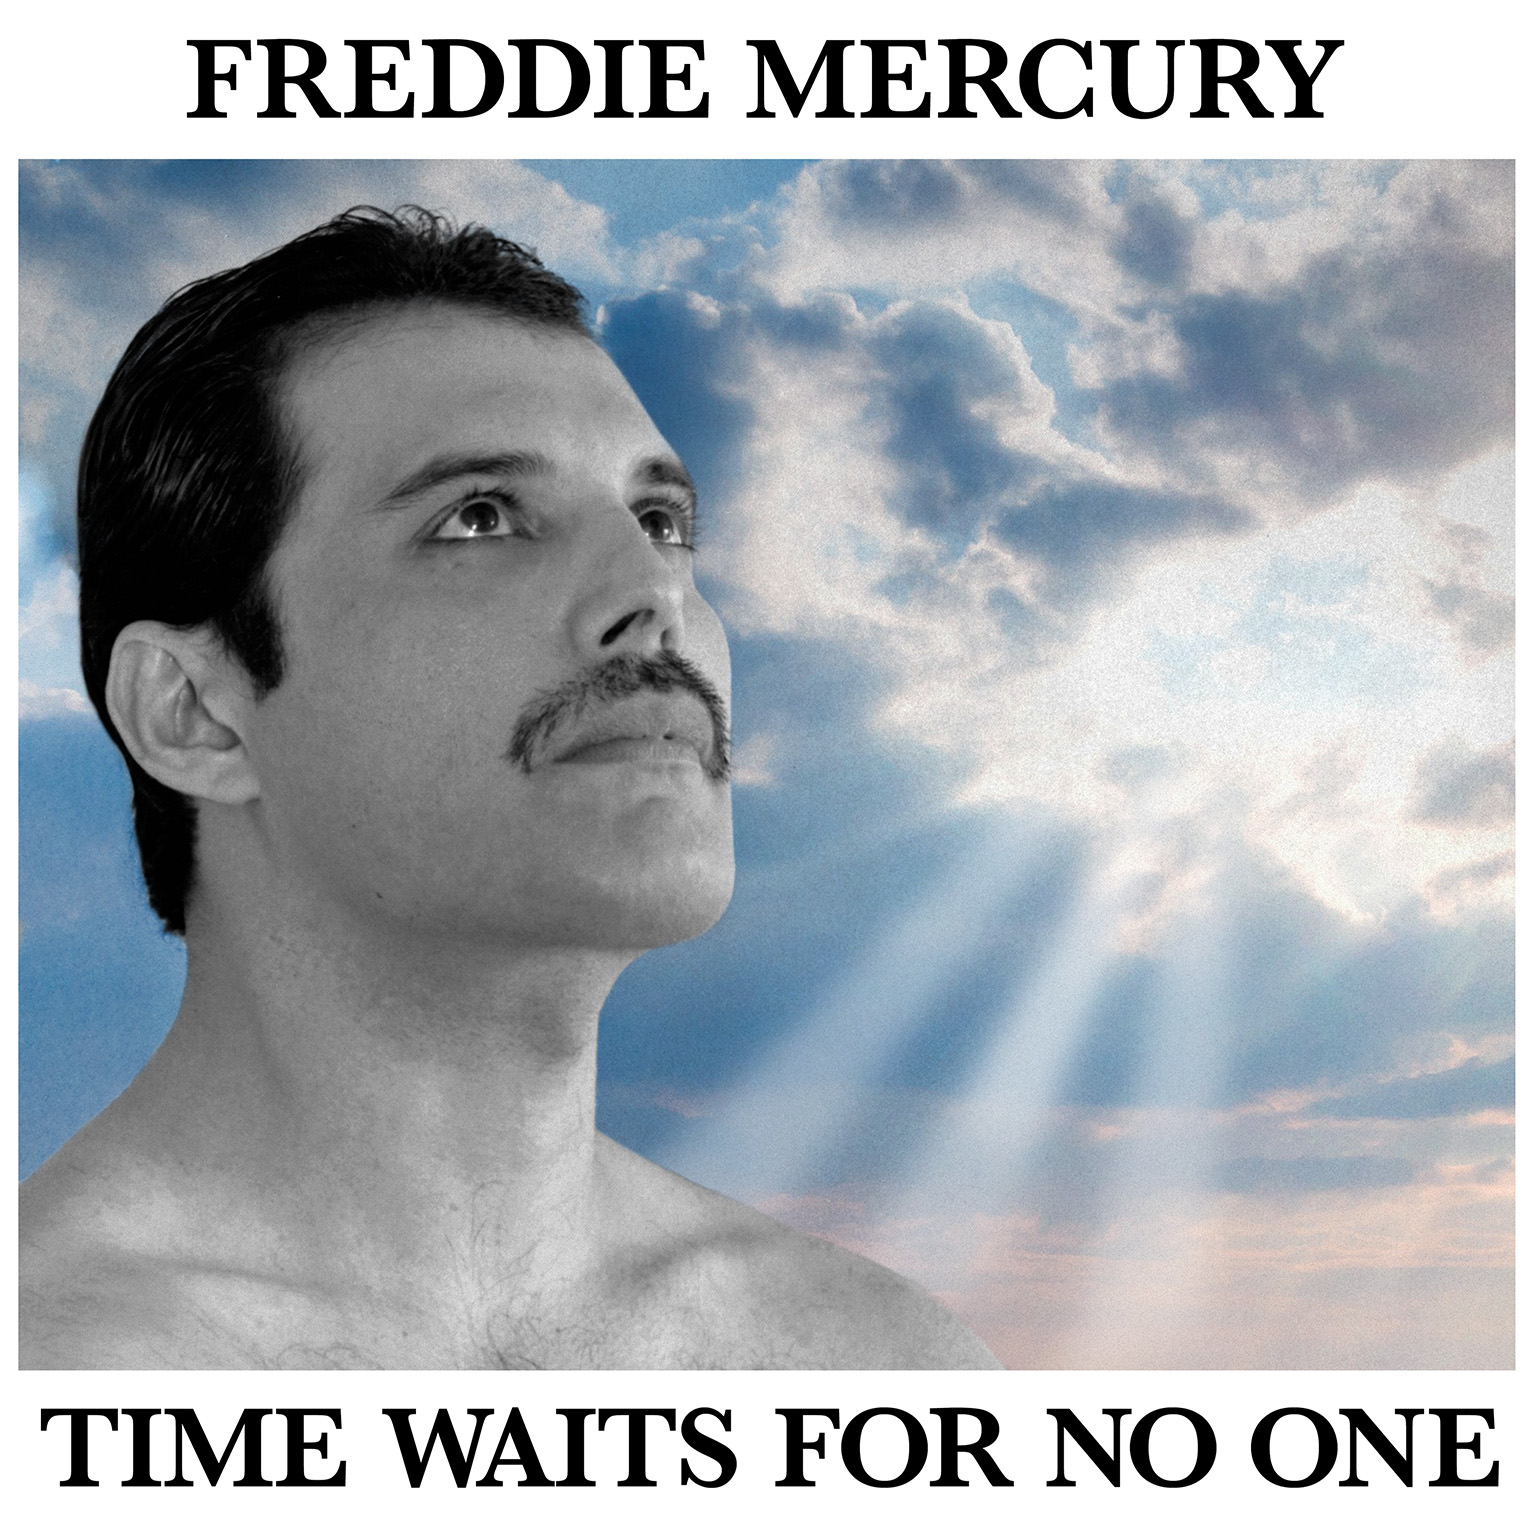 Freddie Mercury Time Waits For No One Cover Art